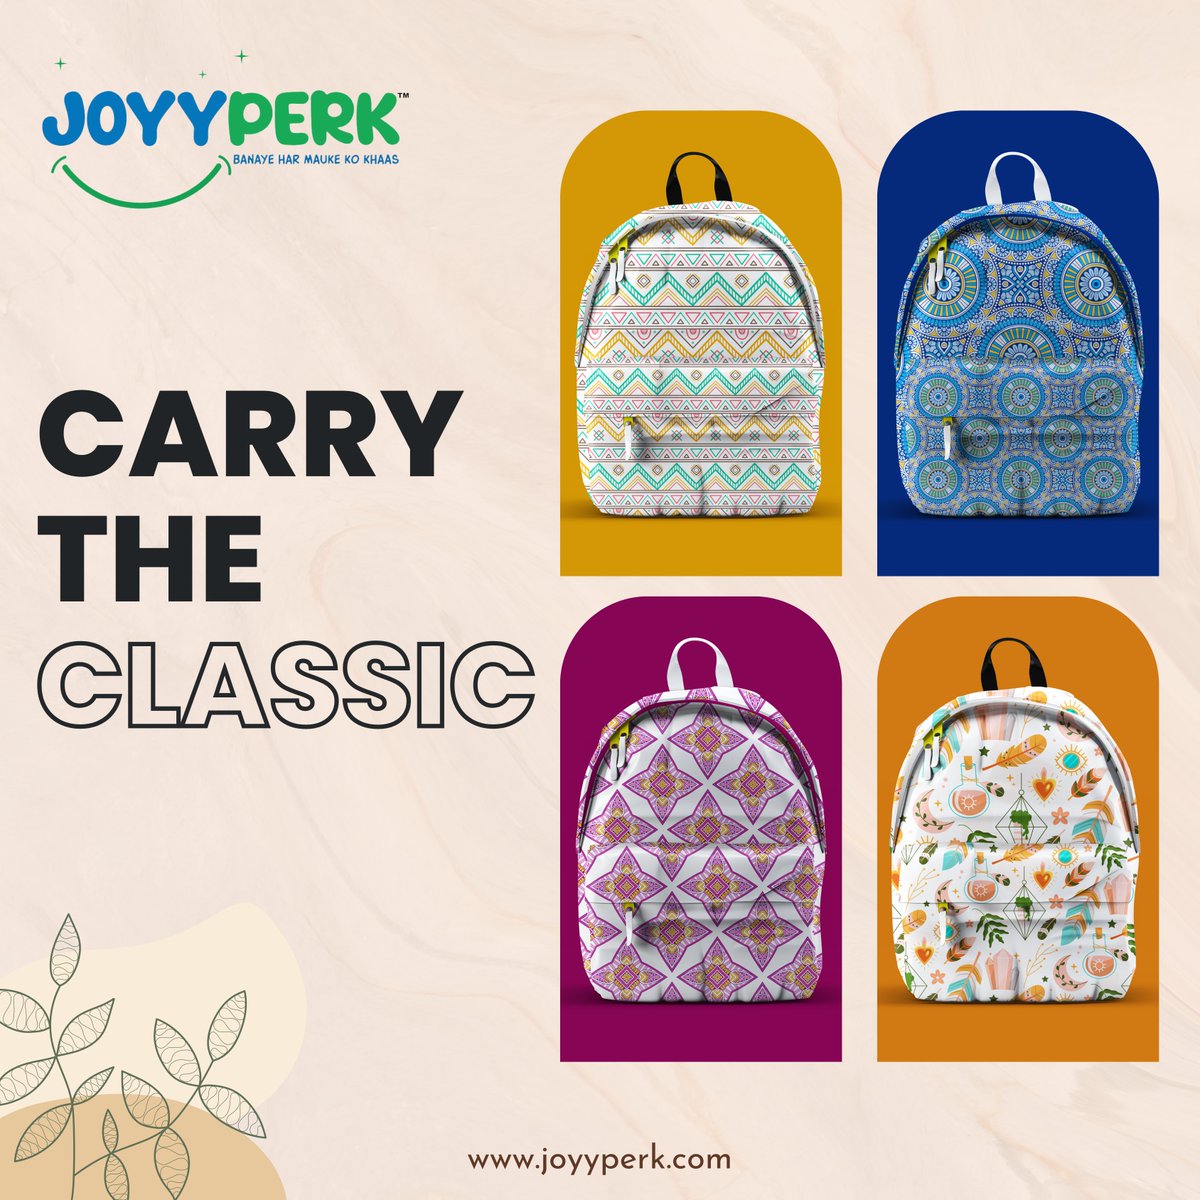 Ready for any adventure with our trusty backpacks by our side.

These trendy and stylish joyyperk bags are a complete fashion statement.

Carry your backpack and start your adventure.

#PackAndGo #AdventureAwaits #joyyperk #bagpacks #trendy #fashionablebags #bagpacksforsale